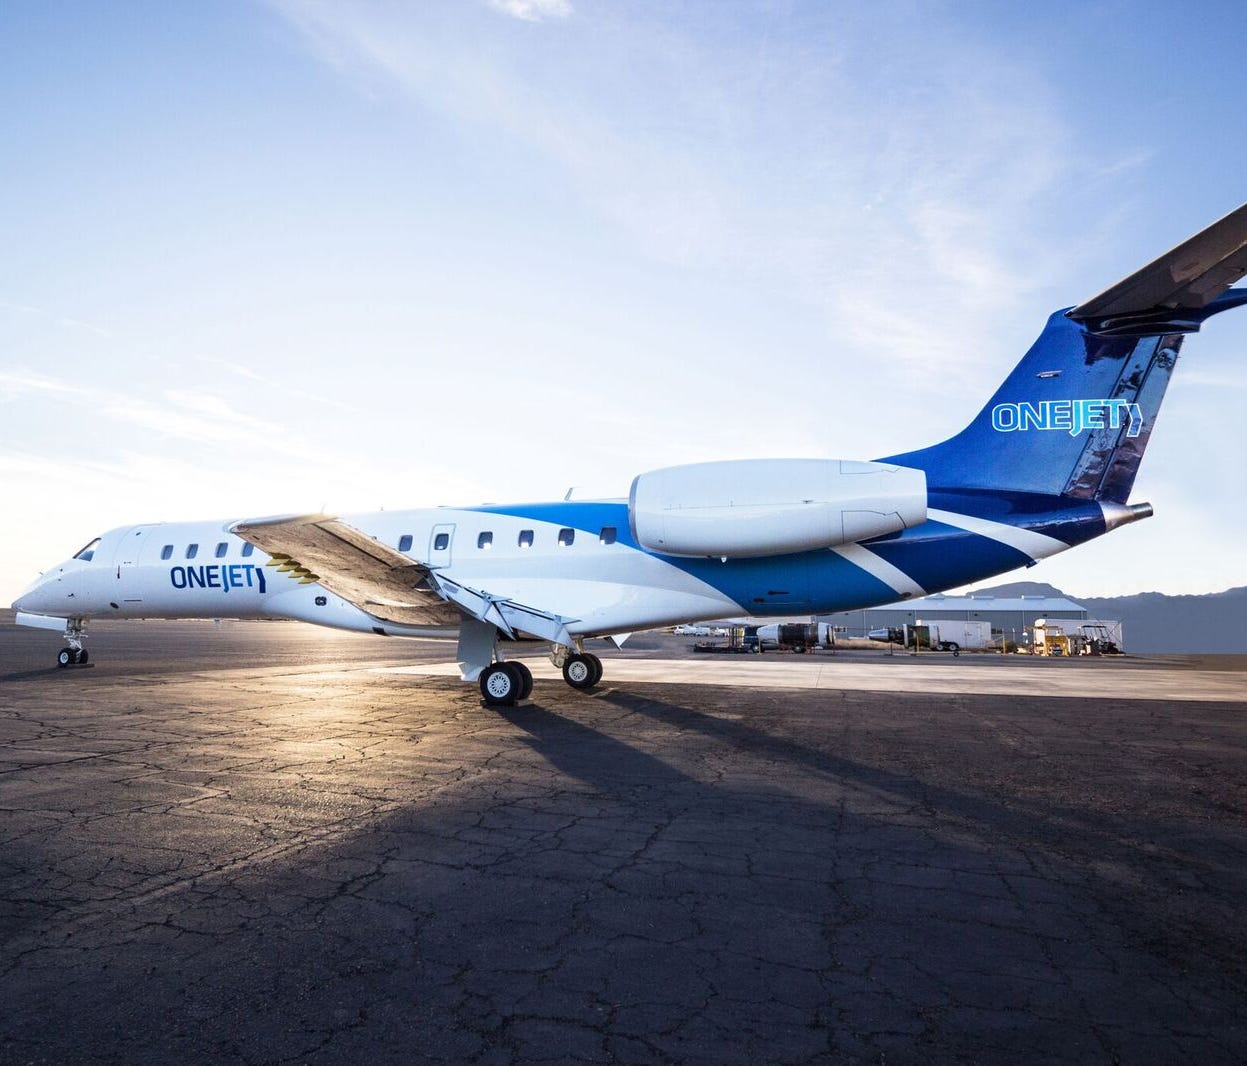 This image, provided by OneJet, shows and Embraer regional jet in the company's color.